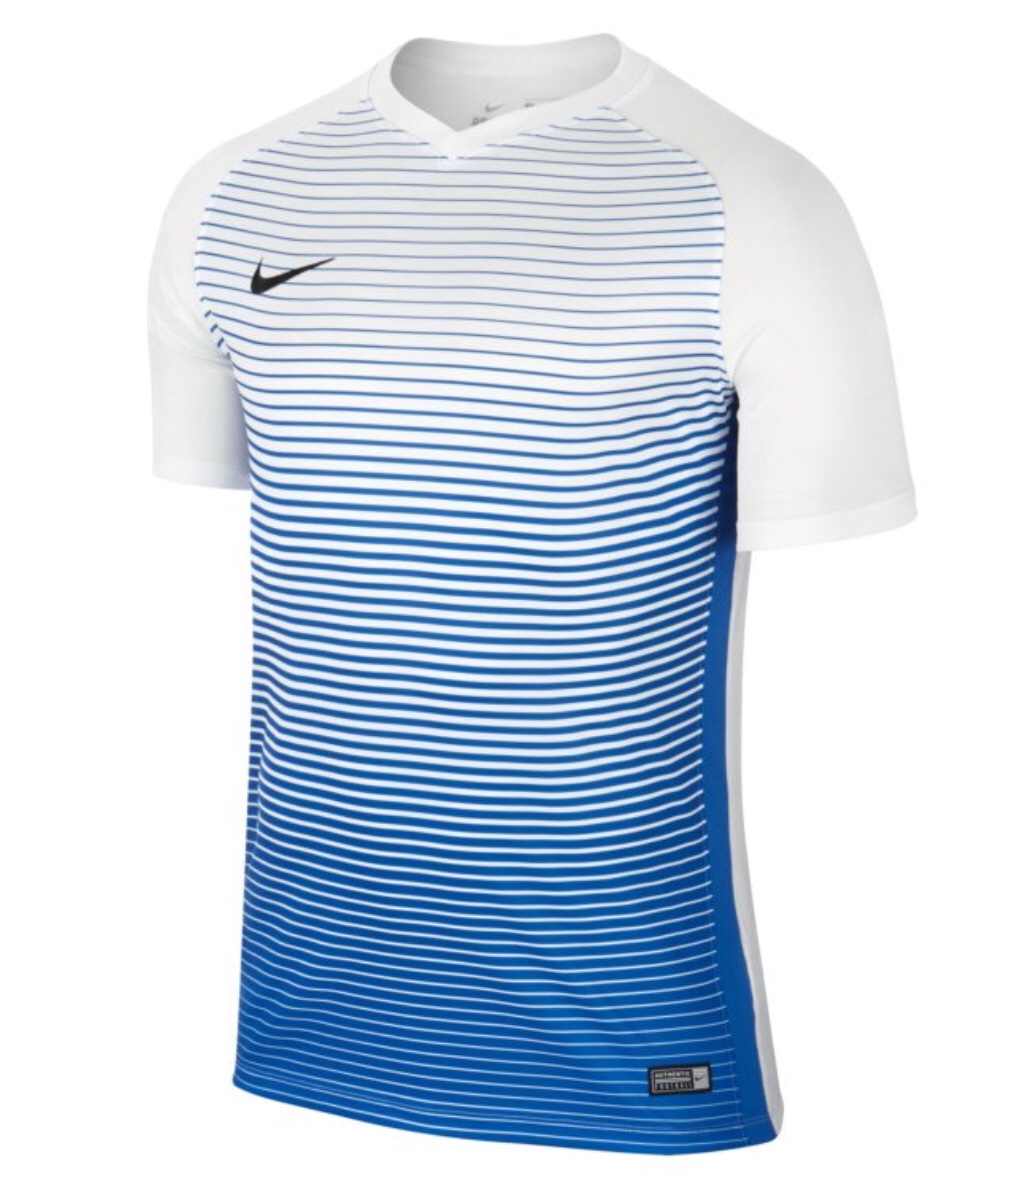 jersey white and blue